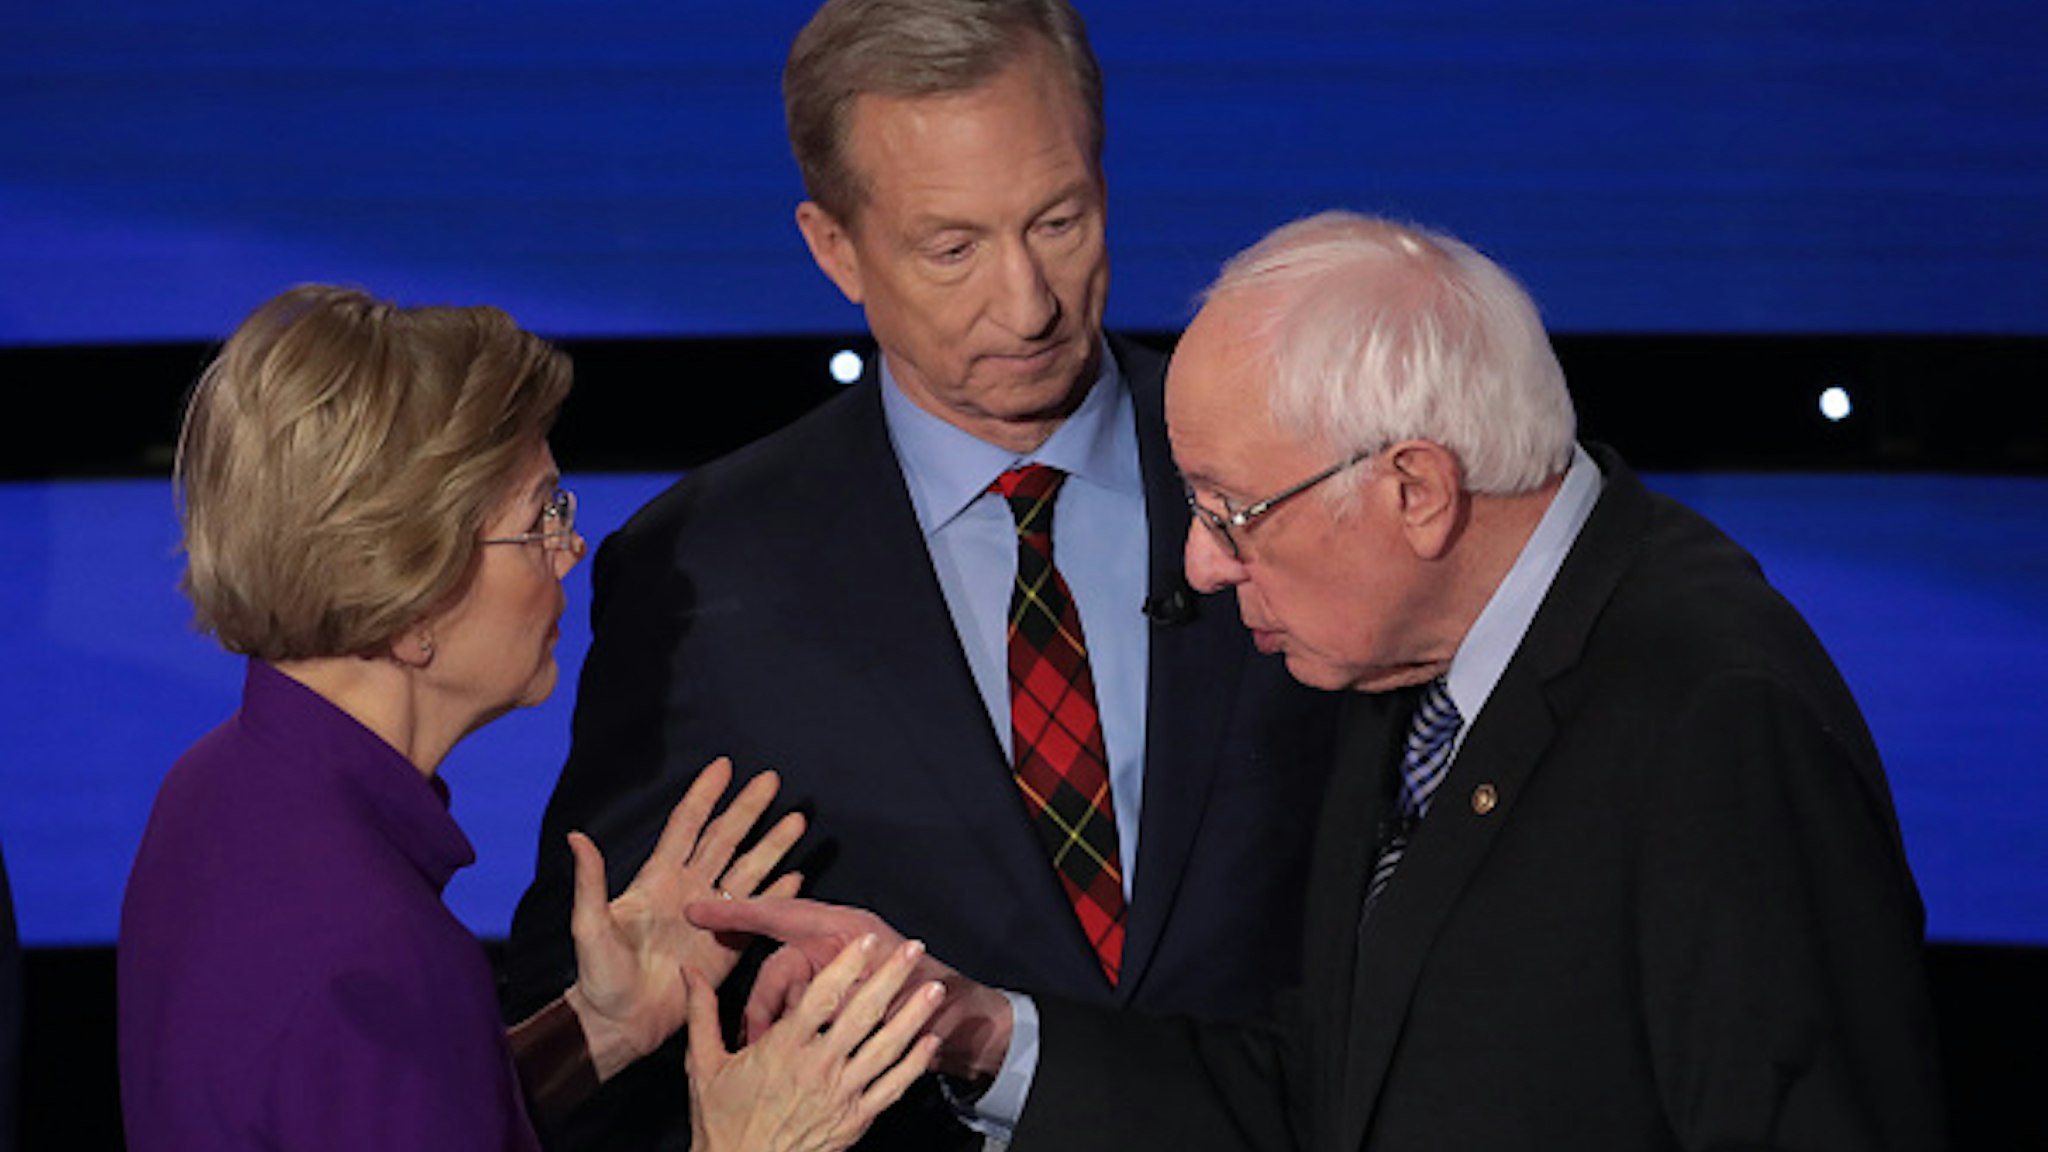 DES MOINES, IOWA - JANUARY 14: Sen. Elizabeth Warren (D-MA) and Sen. Bernie Sanders (I-VT) speak as Tom Steyer looks on after the Democratic presidential primary debate at Drake University on January 14, 2020 in Des Moines, Iowa. Six candidates out of the field qualified for the first Democratic presidential primary debate of 2020, hosted by CNN and the Des Moines Register.